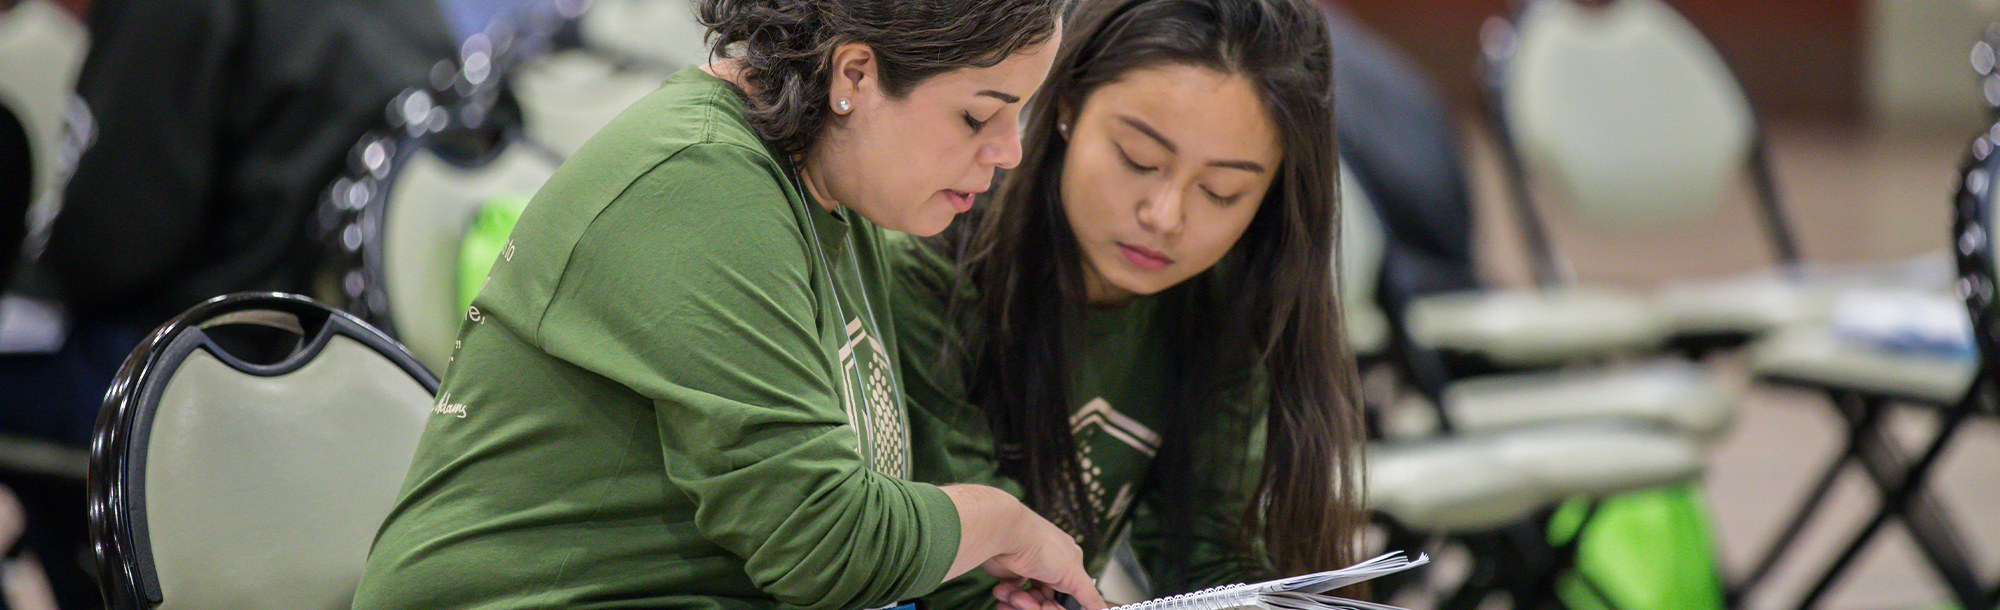 Two female students looking at a notebook together